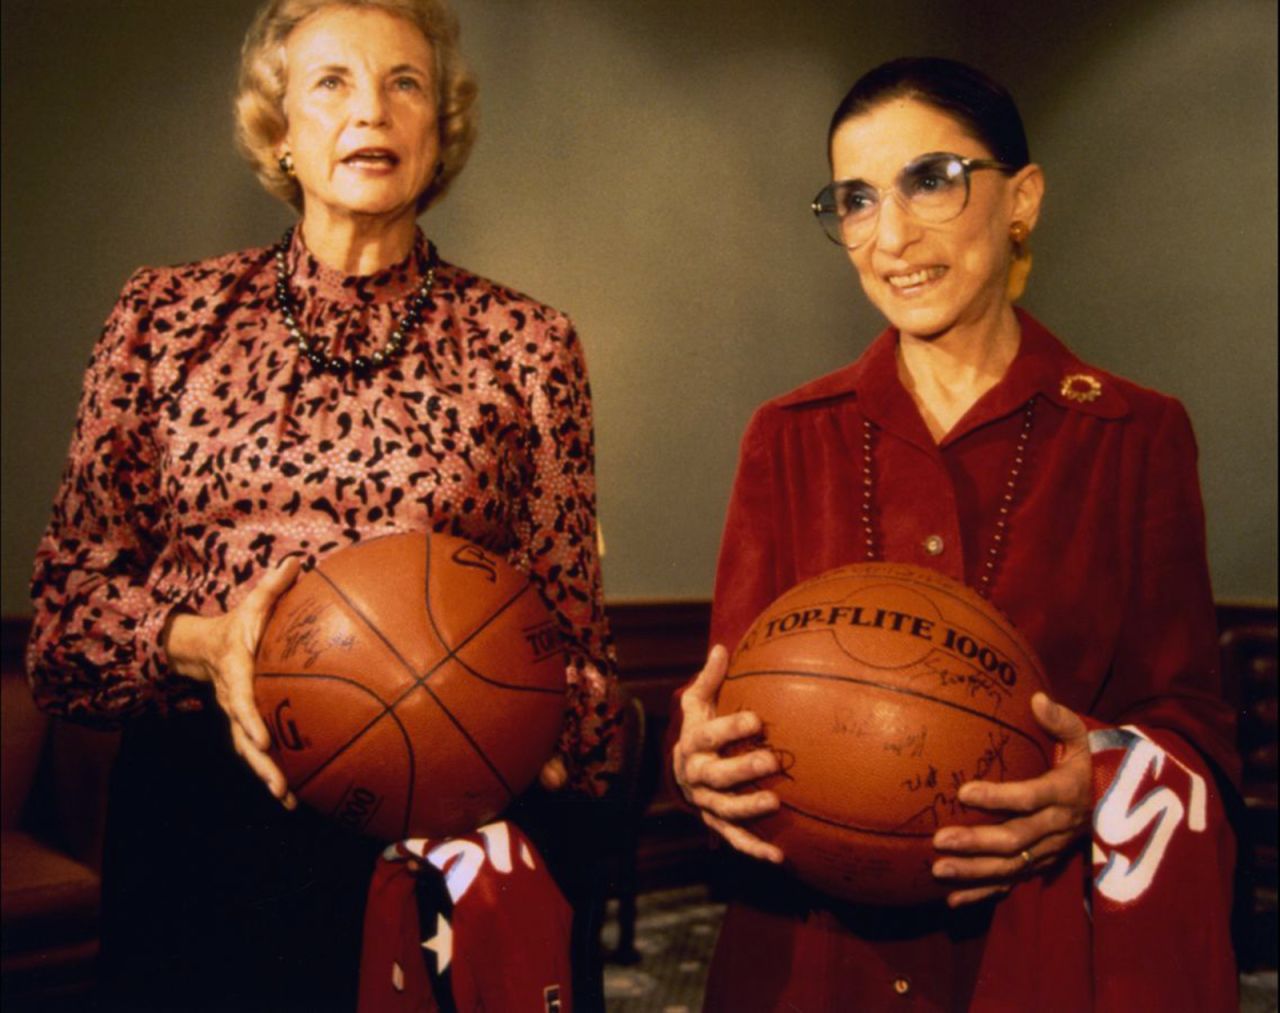 Ginsburg and fellow Justice Sandra Day O'Connor hold basketballs given to them by the US women's basketball team in December 1995.